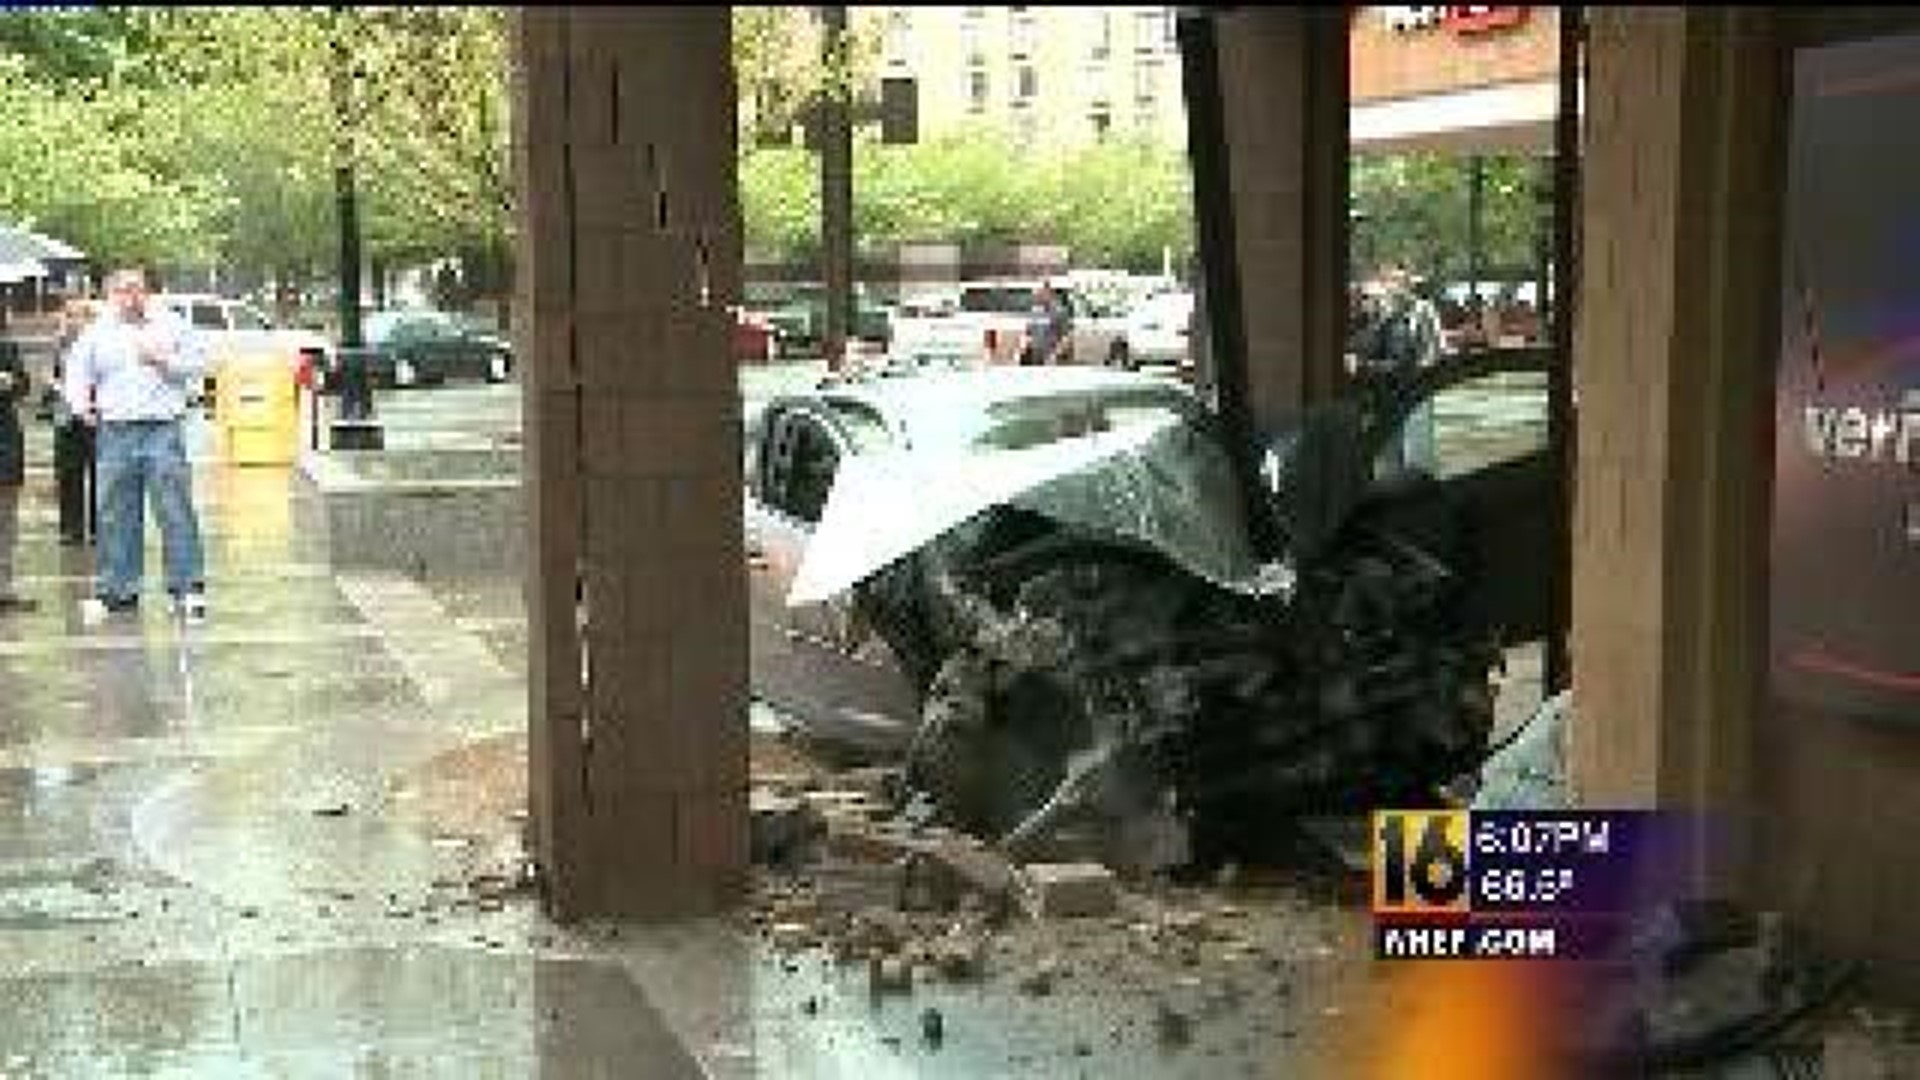 Car Smashes Into Building on Public Square